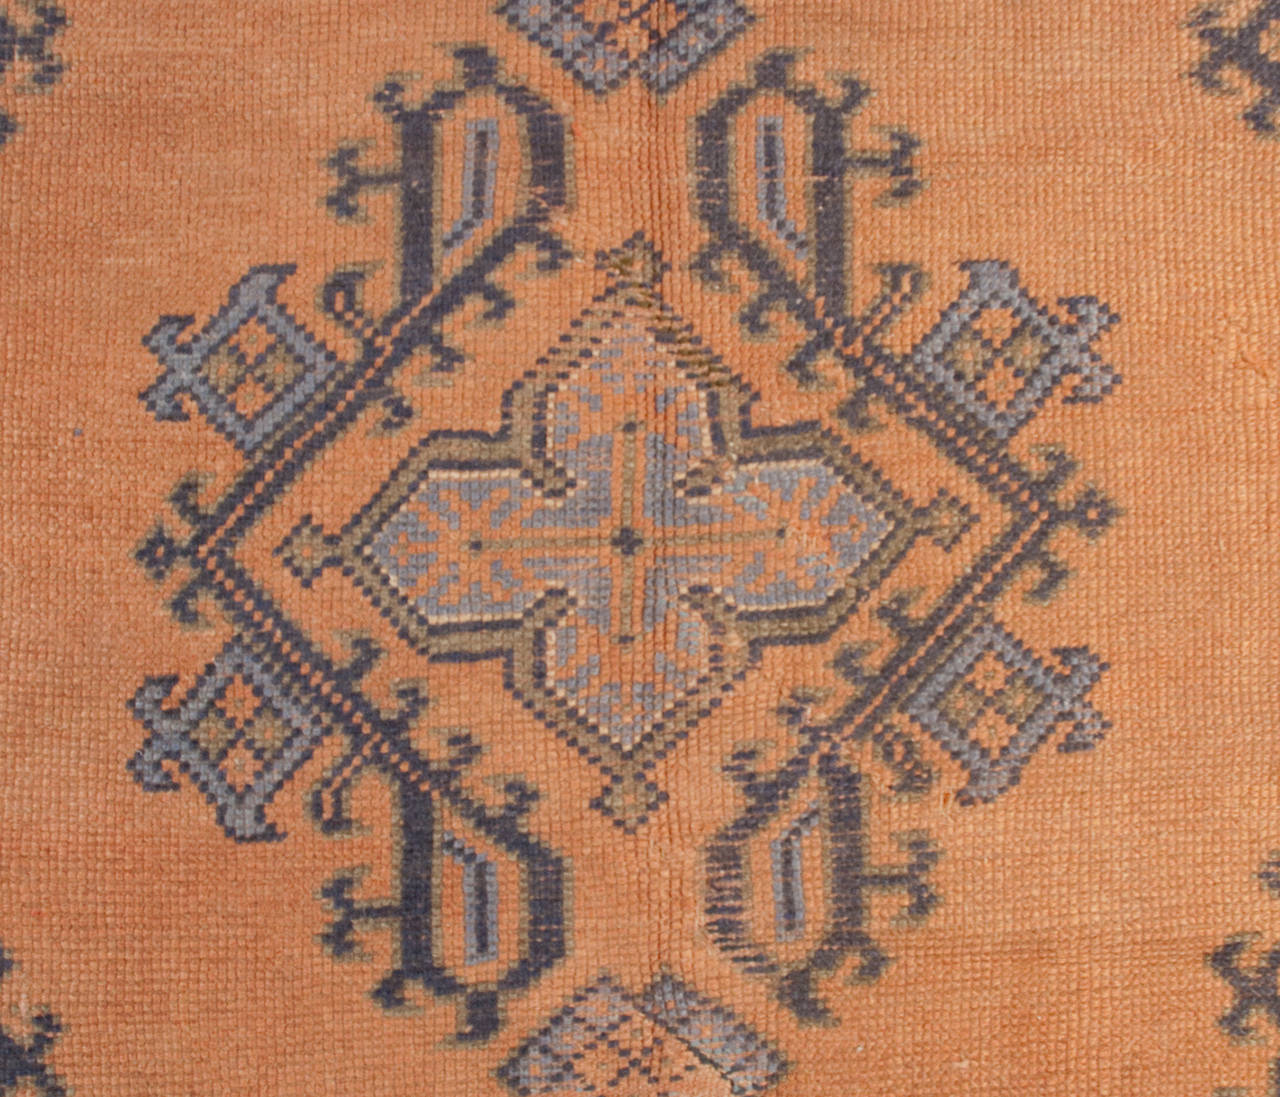 A late 19th century Turkish Oushak rug with multiple geometric and floral medallions on a burnt orange background surrounded by multiple floral borders.